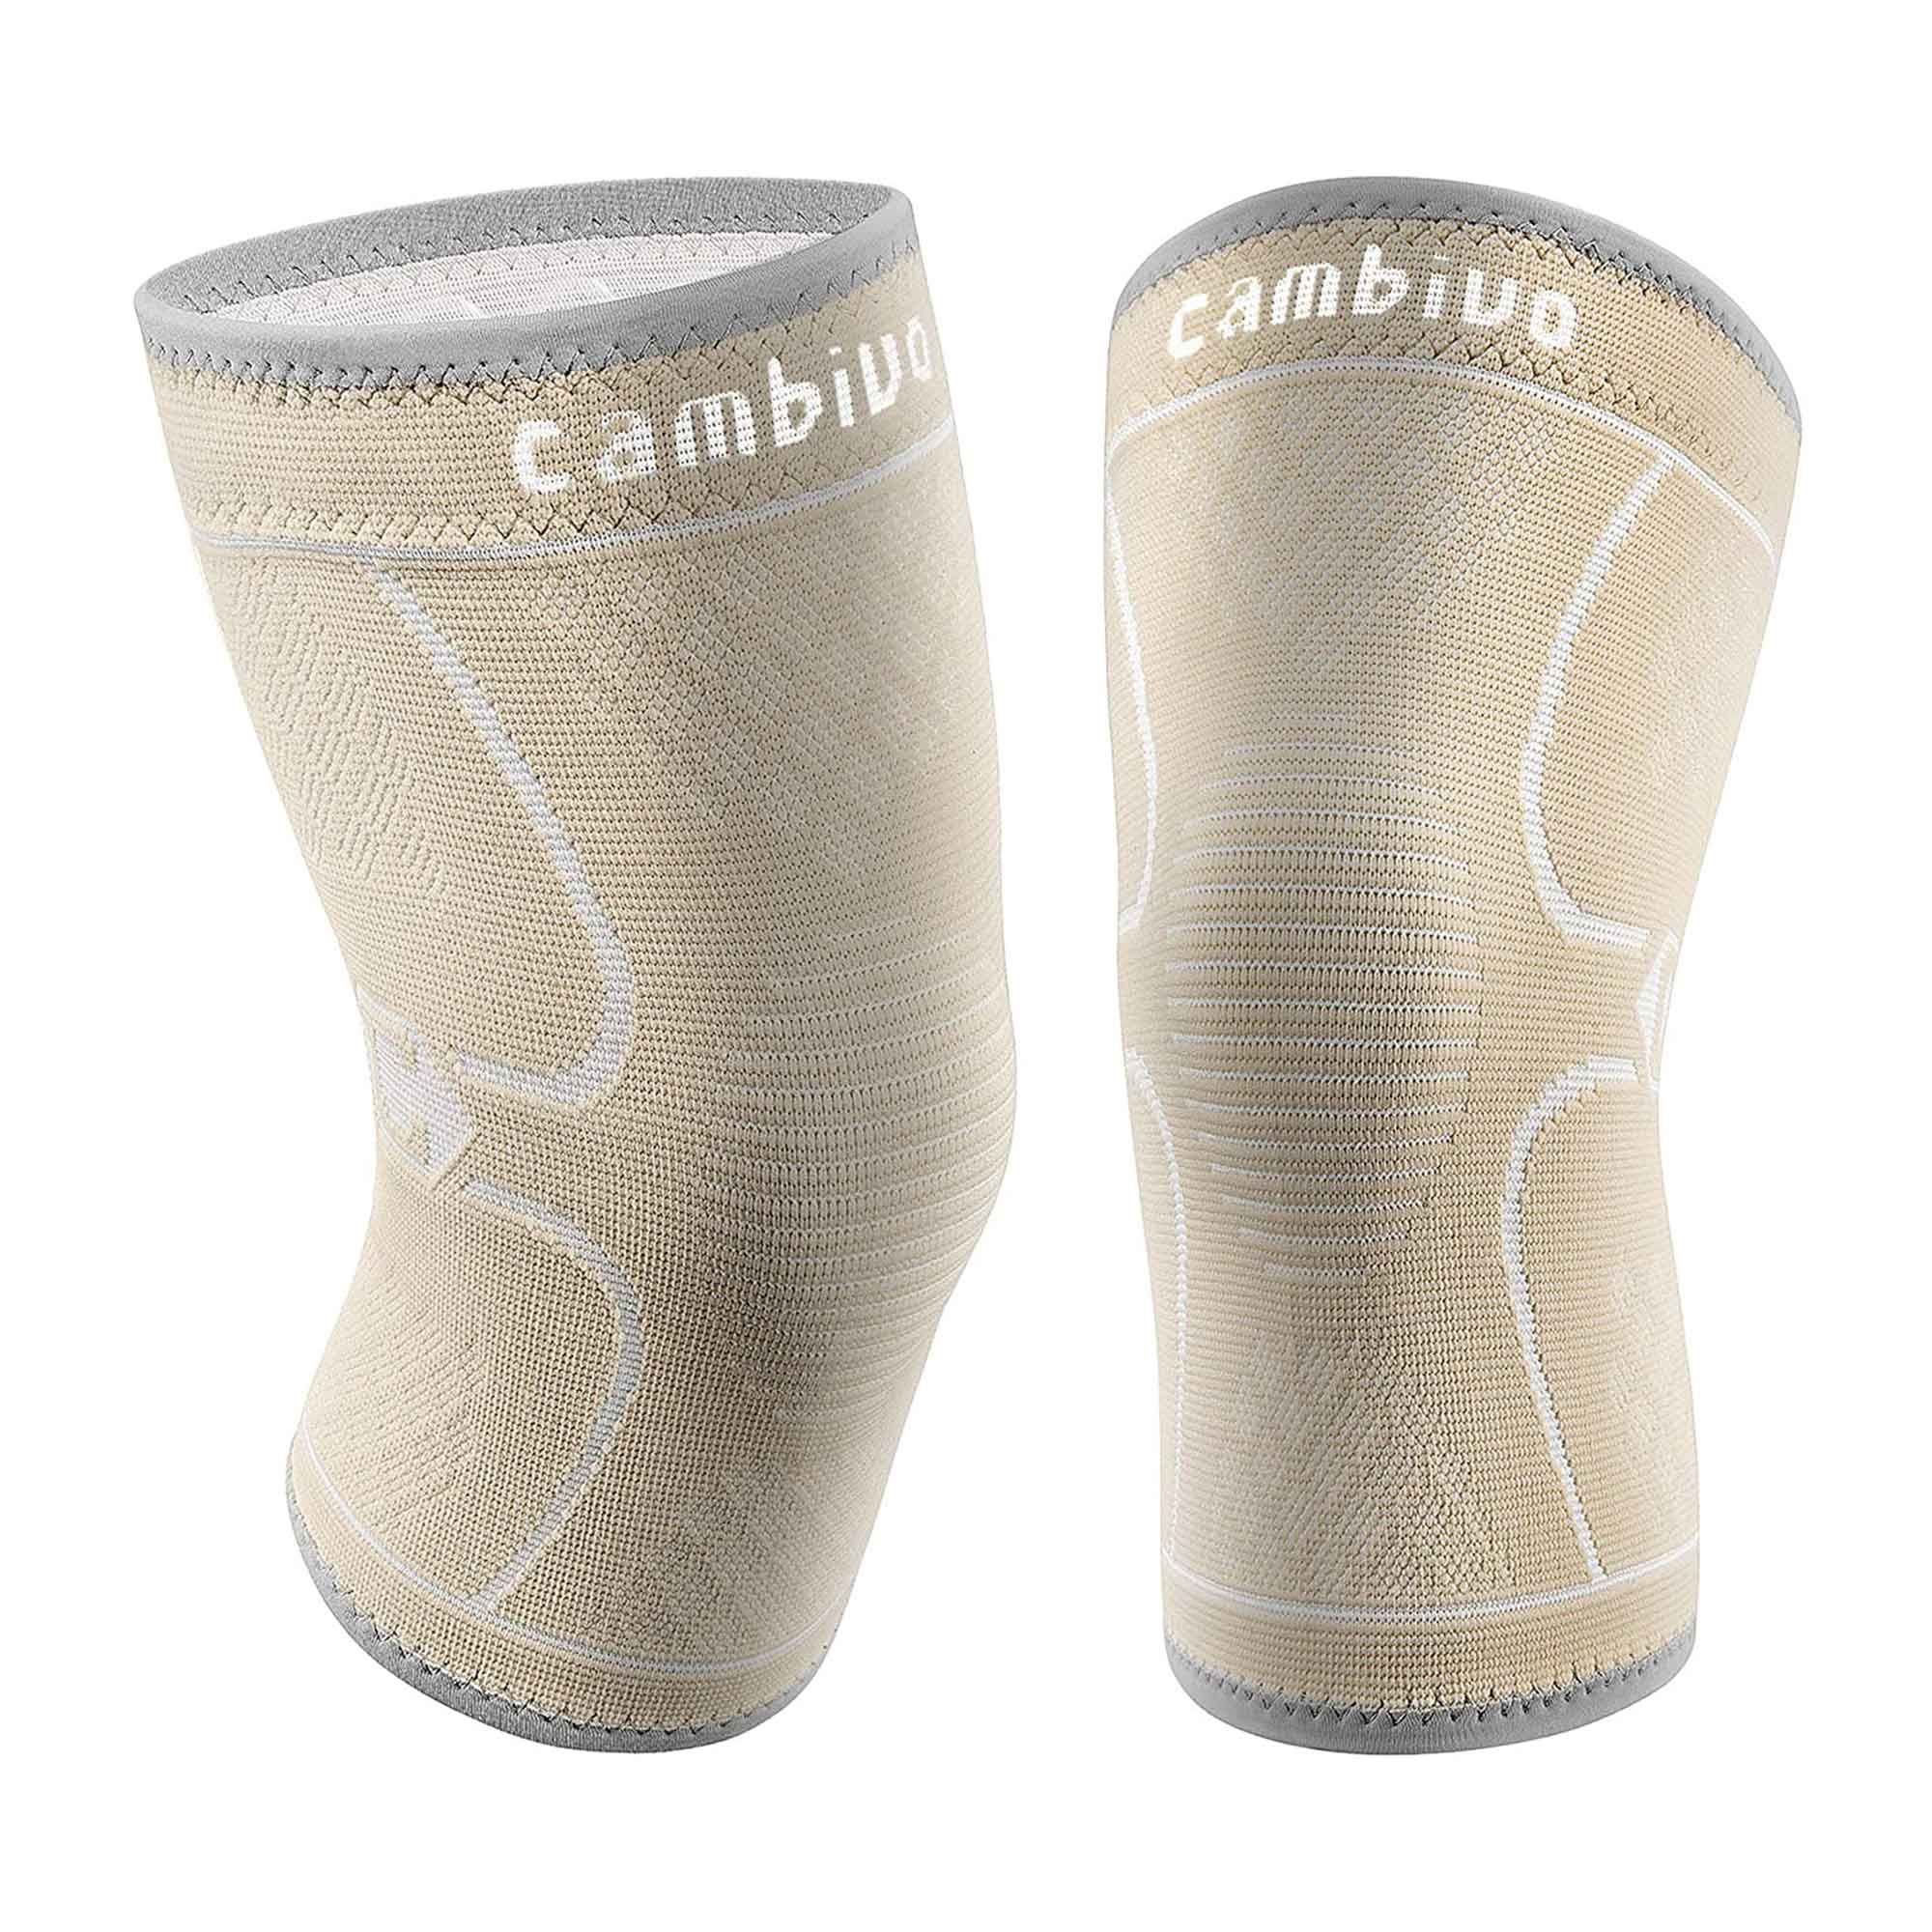  CAMBIVO 2 Pack Knee Braces for Knee Pain, Knee